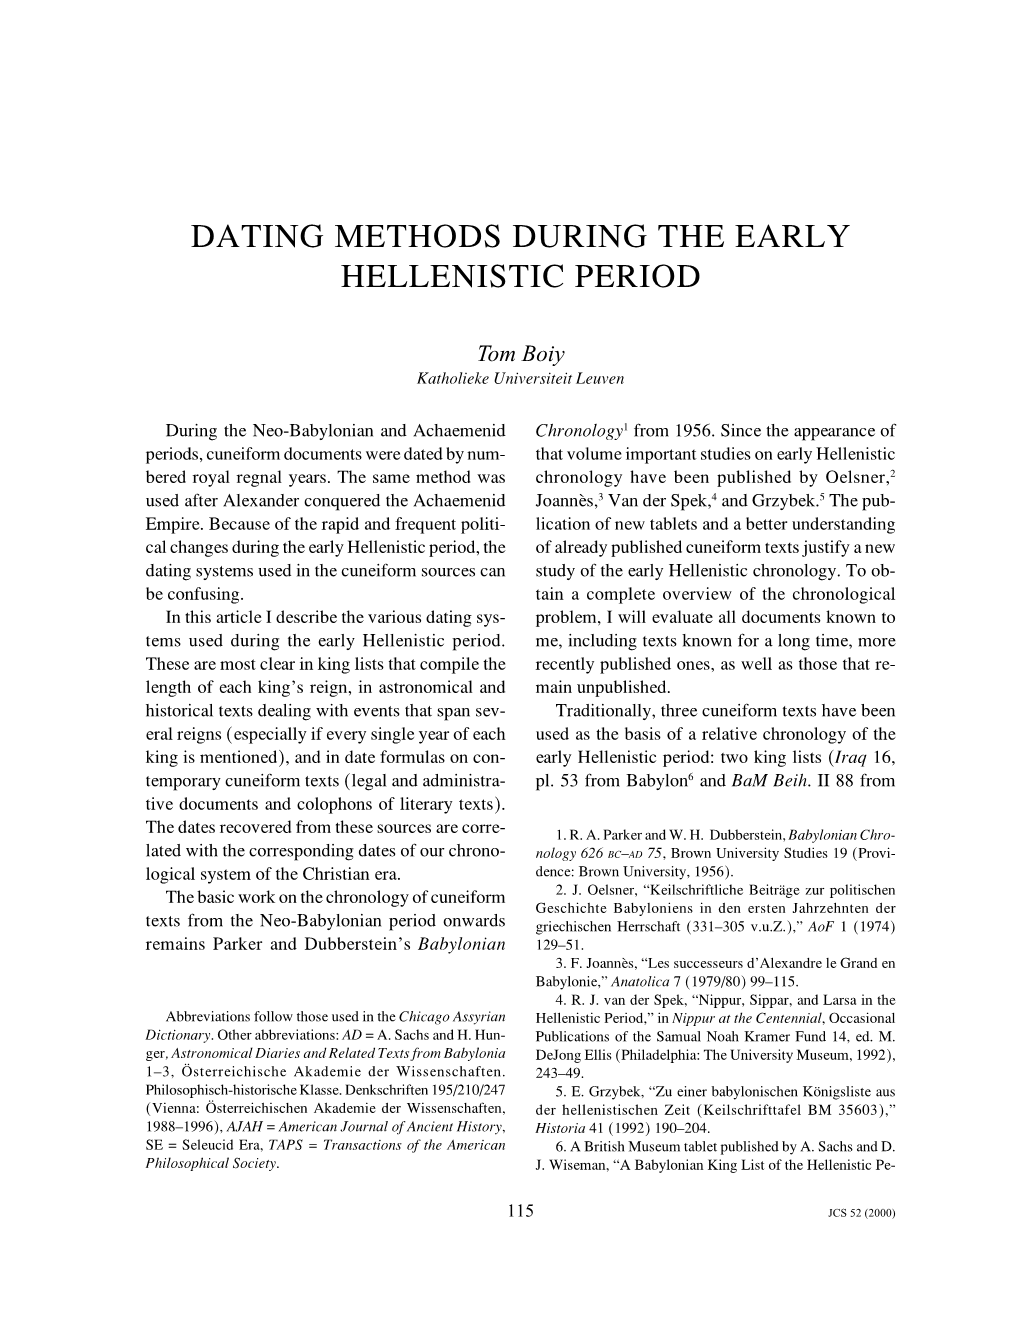 Dating Methods During the Early Hellenistic Period